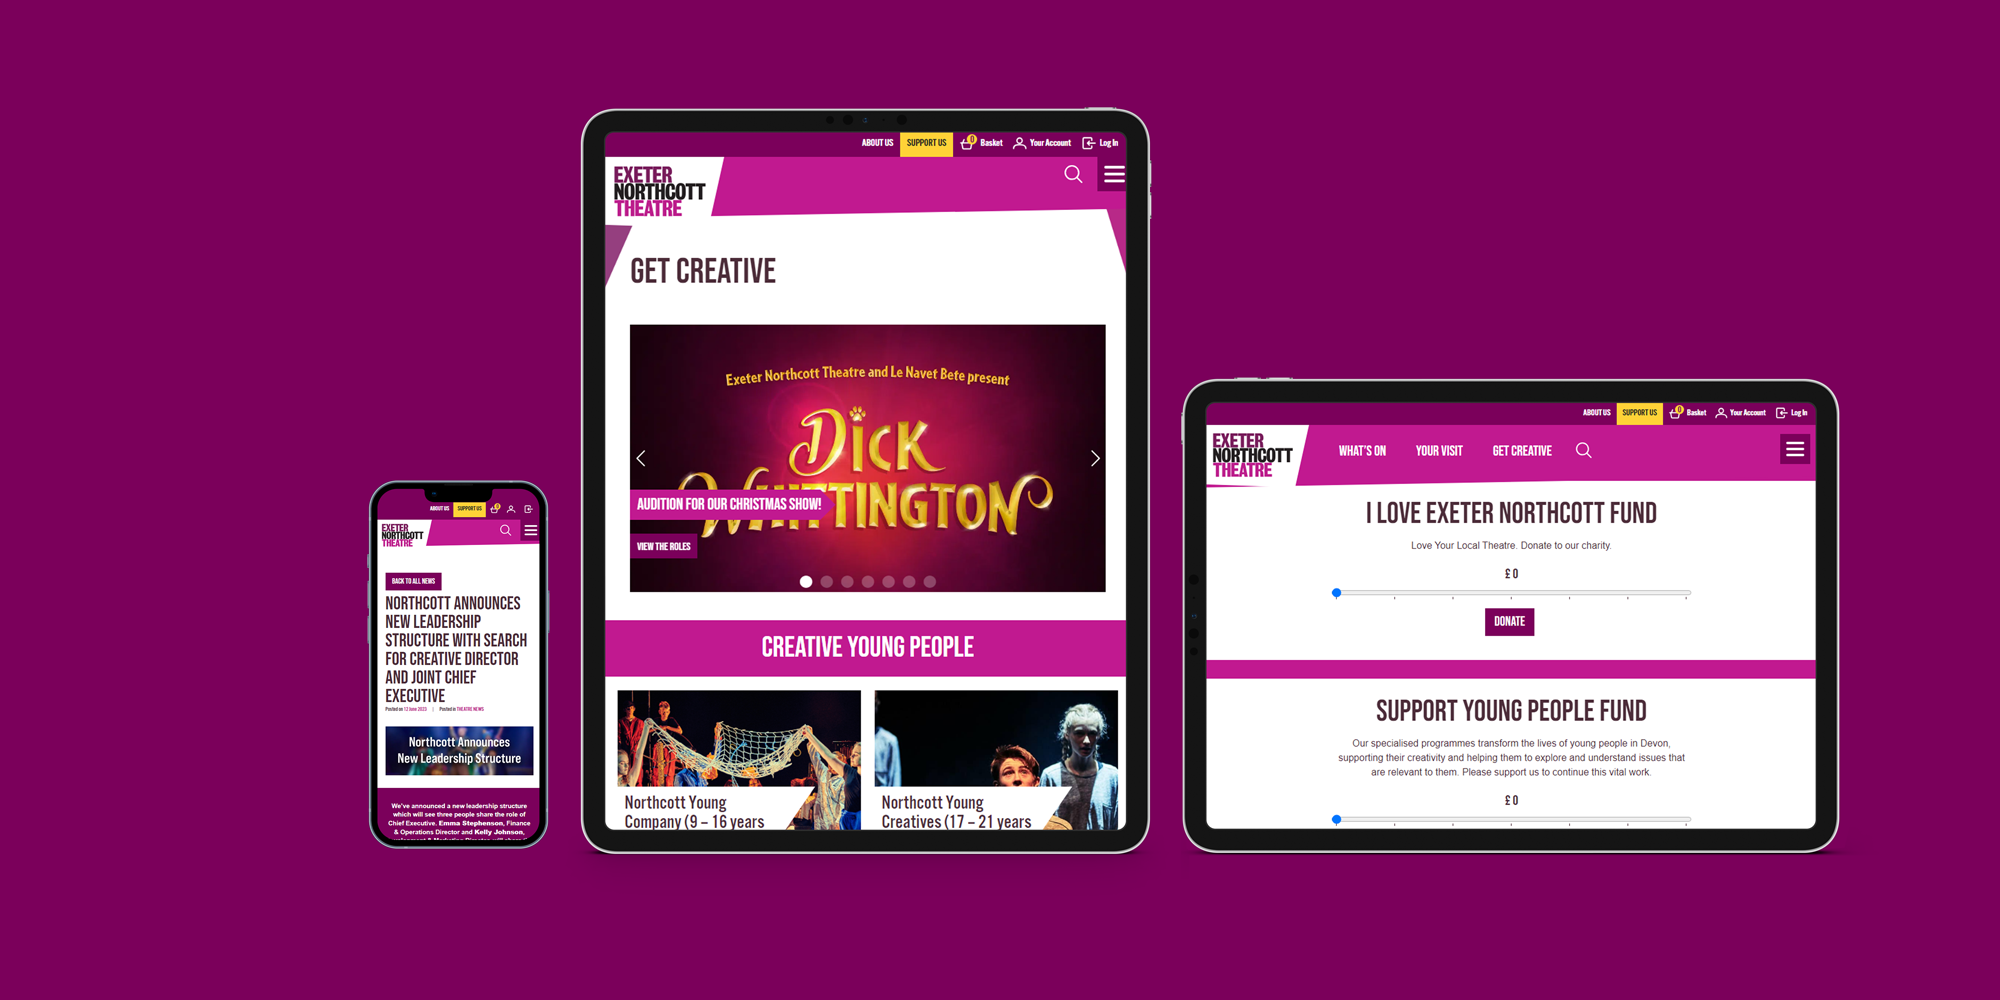 The Exeter Northcott Theatre web pages shown on a tablet and phone screen